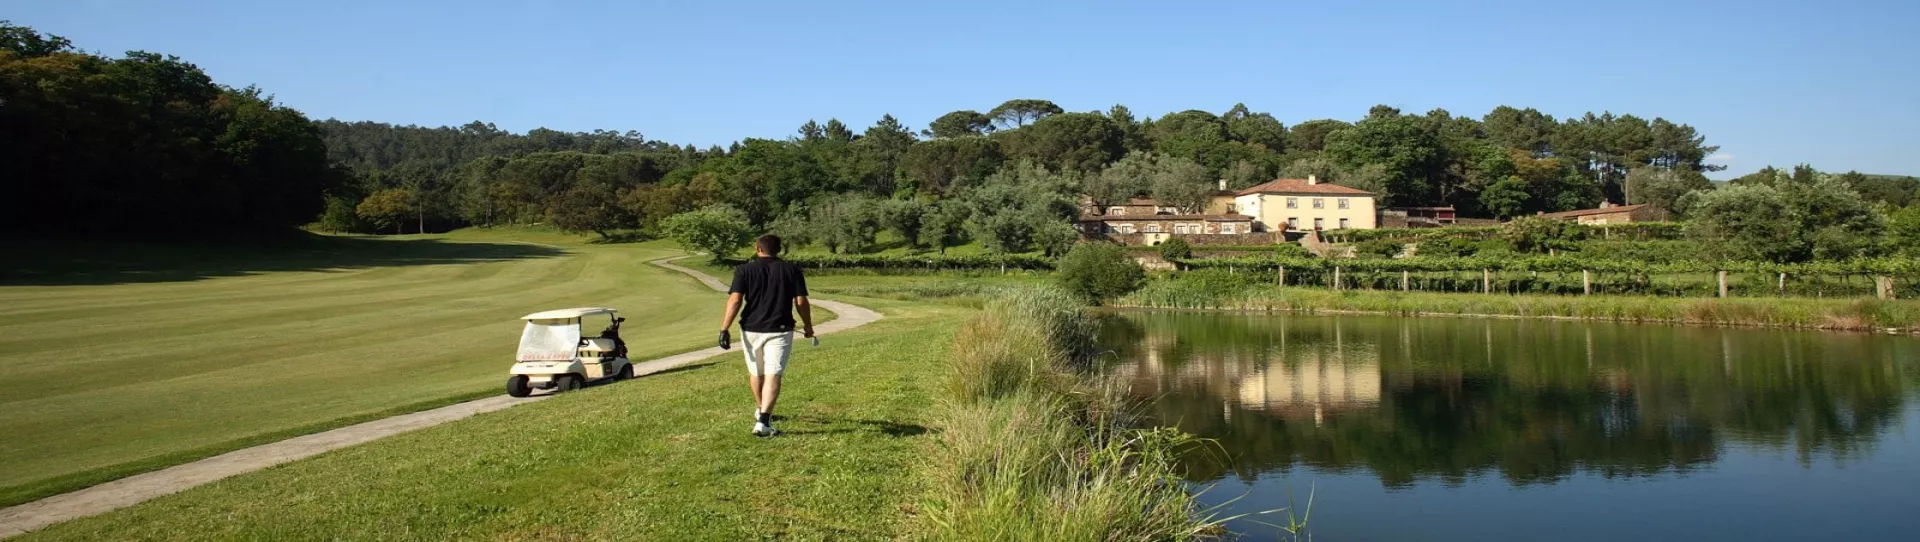 Portugal golf holidays - 5 Nights BB & 3 Days Unlimited Golf Rounds - Photo 1